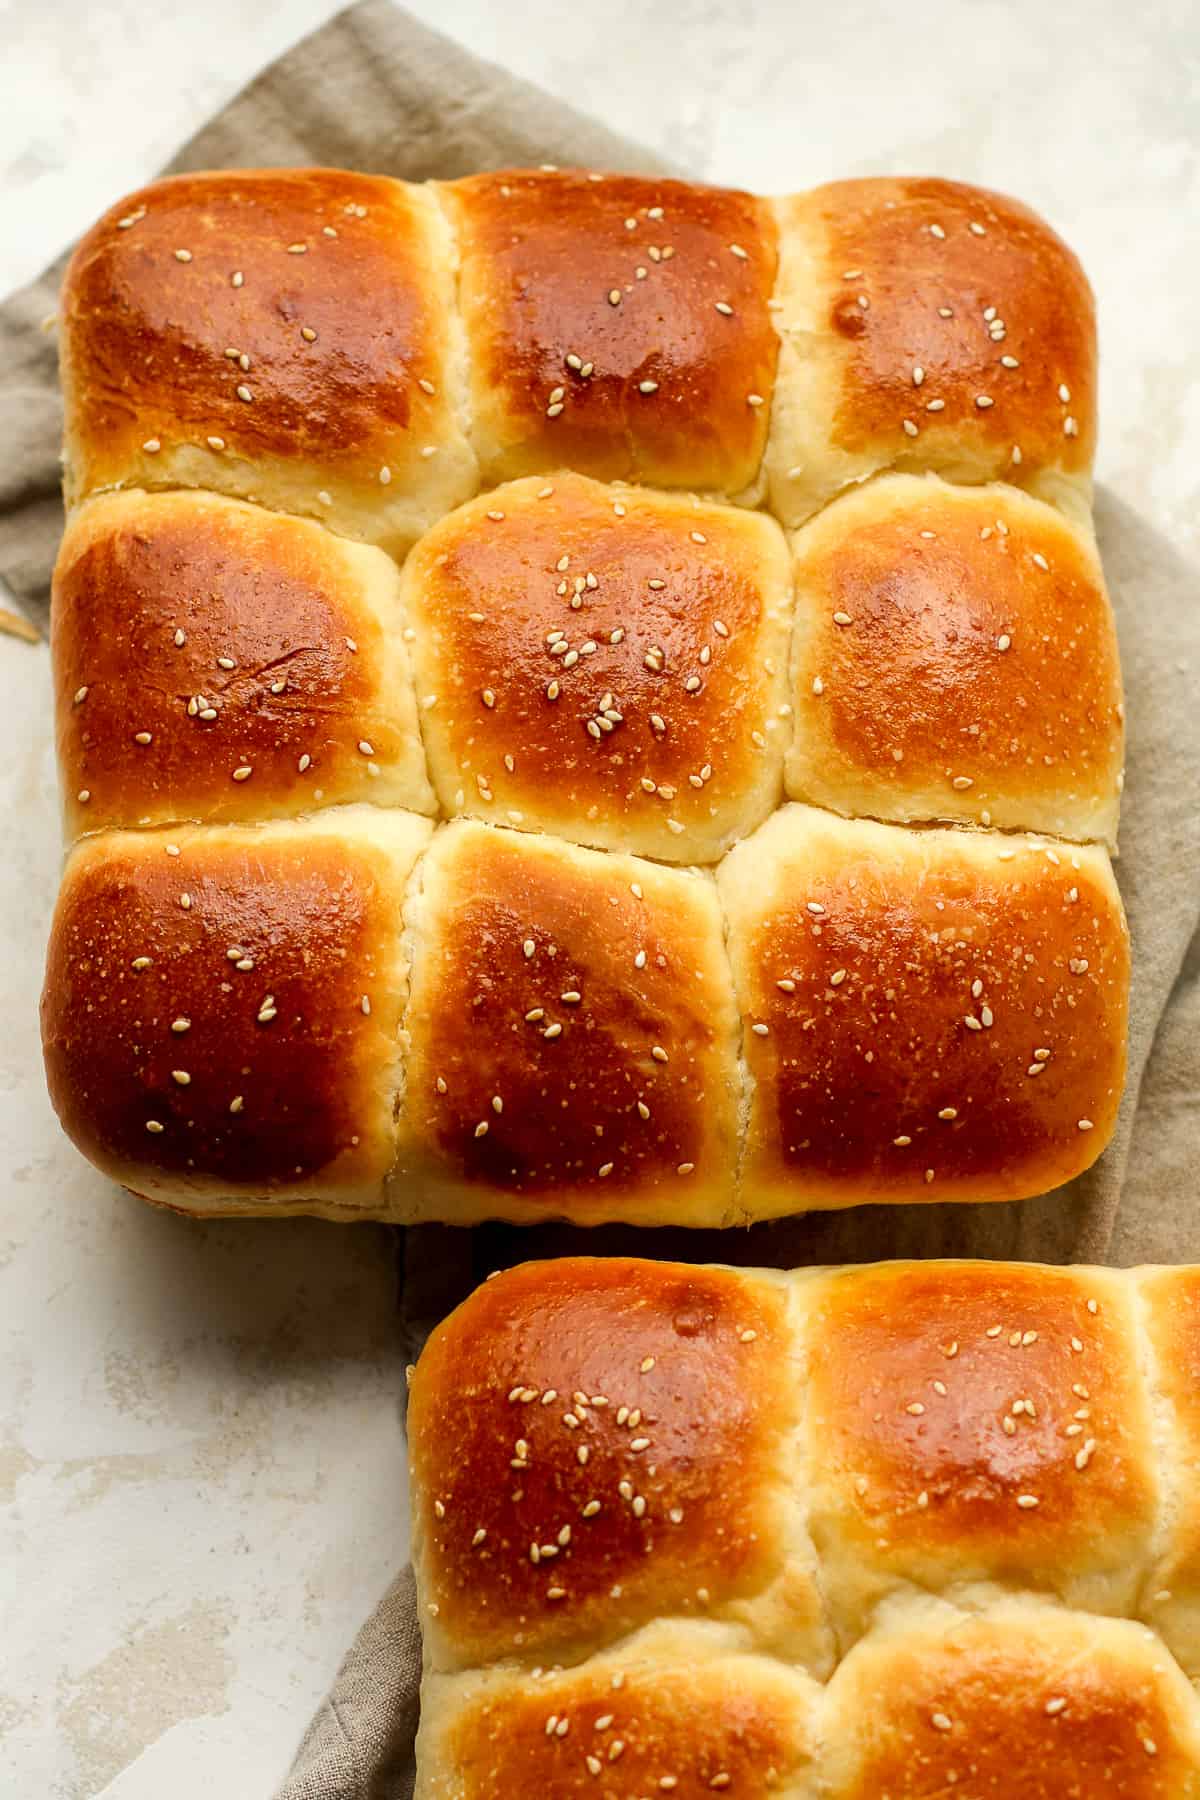 Two pans of brioche dinner rolls on a gray napkin.